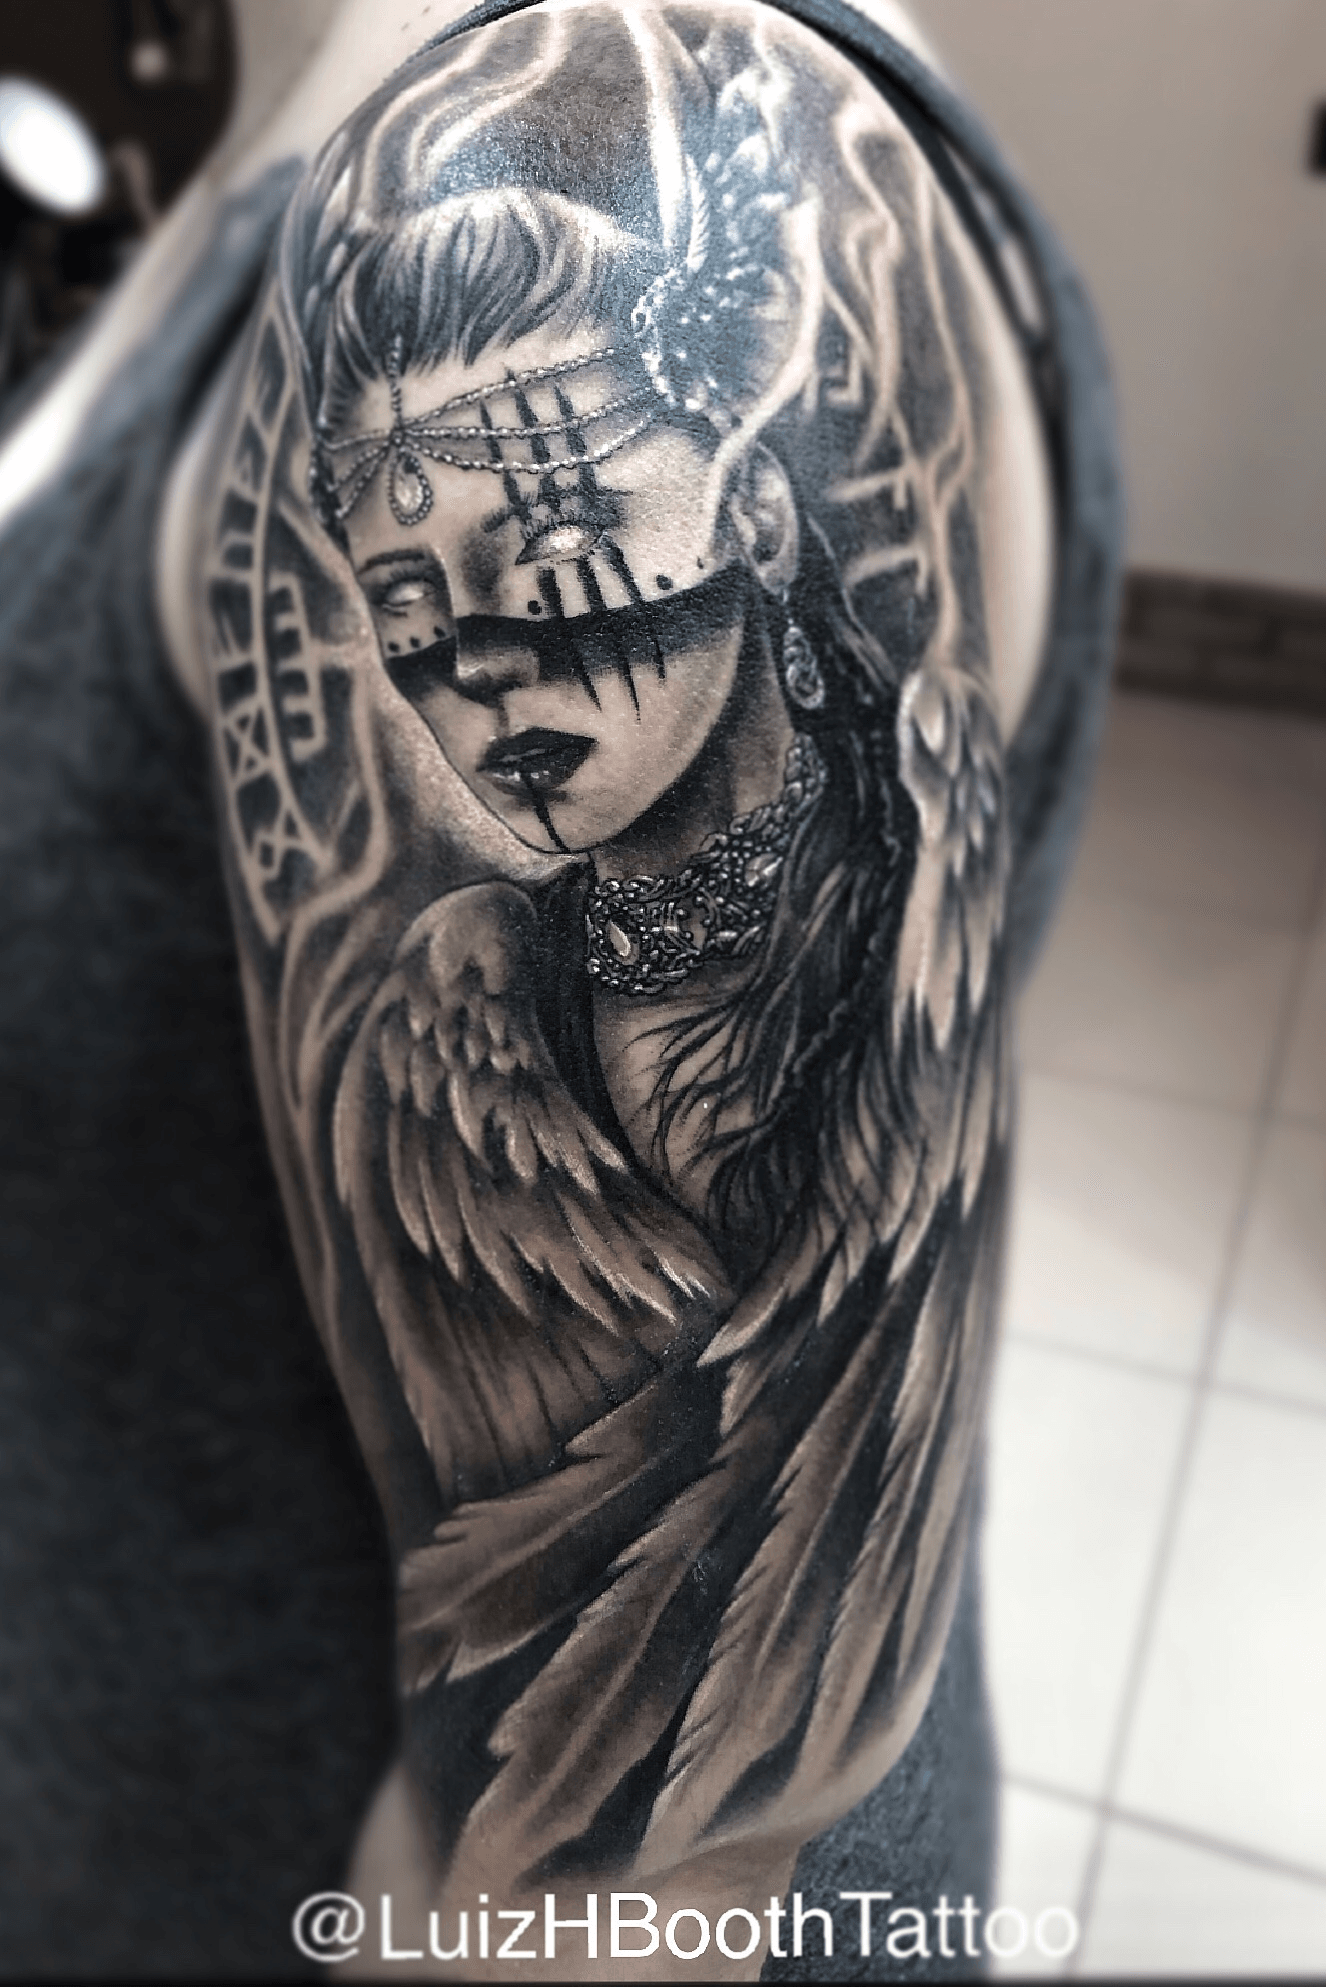 TattoosbySZTRK  AVAILABLE TATTOO DESIGN  Freya is the Goddess of love  in Norse mythology but she is also associated with sex lust beauty  sorcery fertility gold war and death Thats what